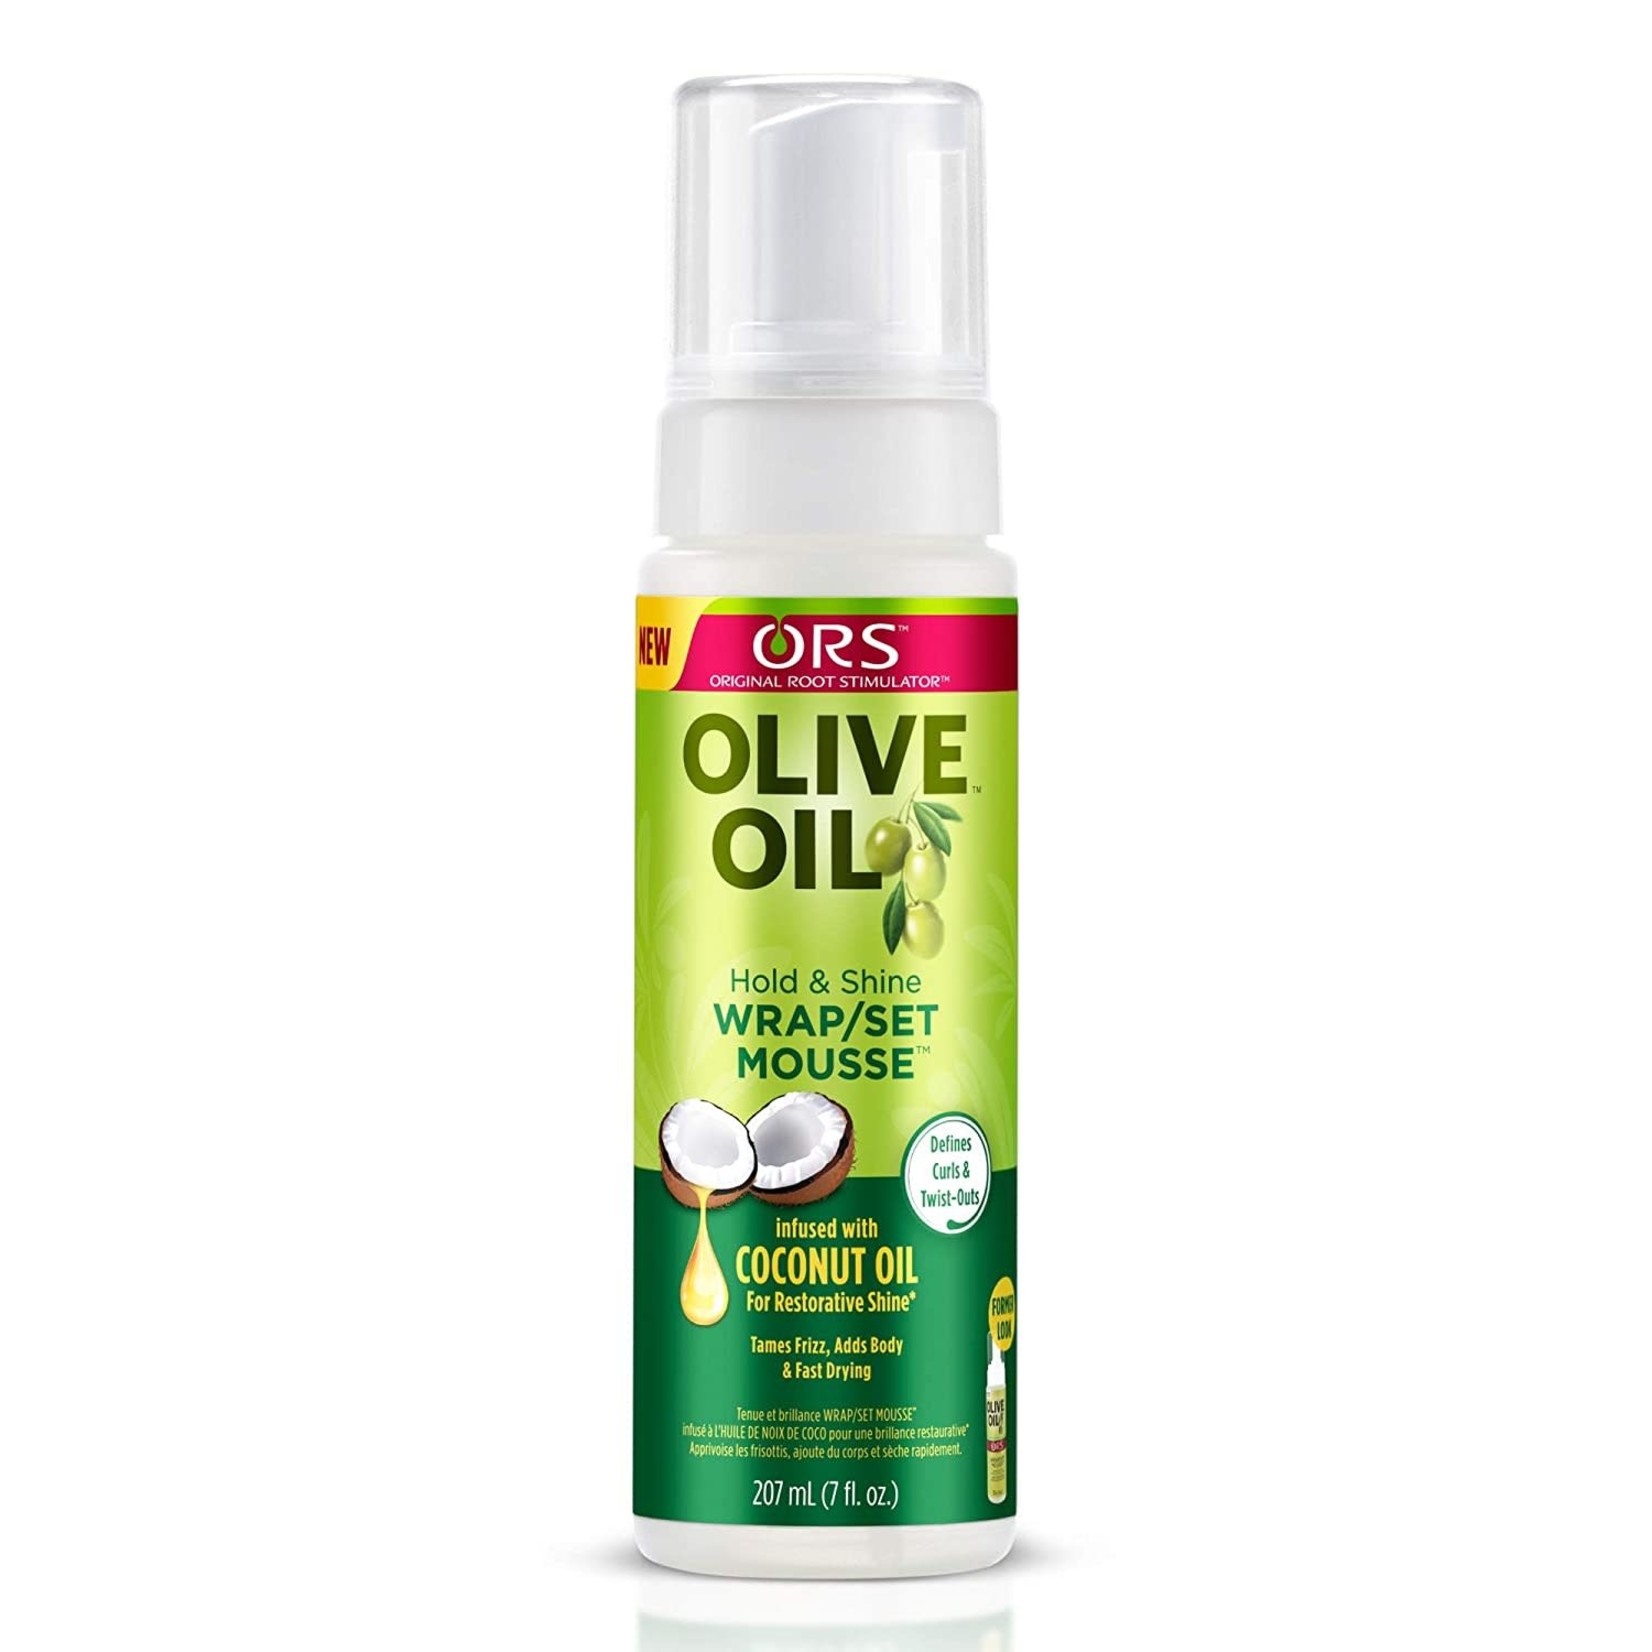 ORS ORGANIC ROOT OLIVE OIL WRAP/SET MOUSSE